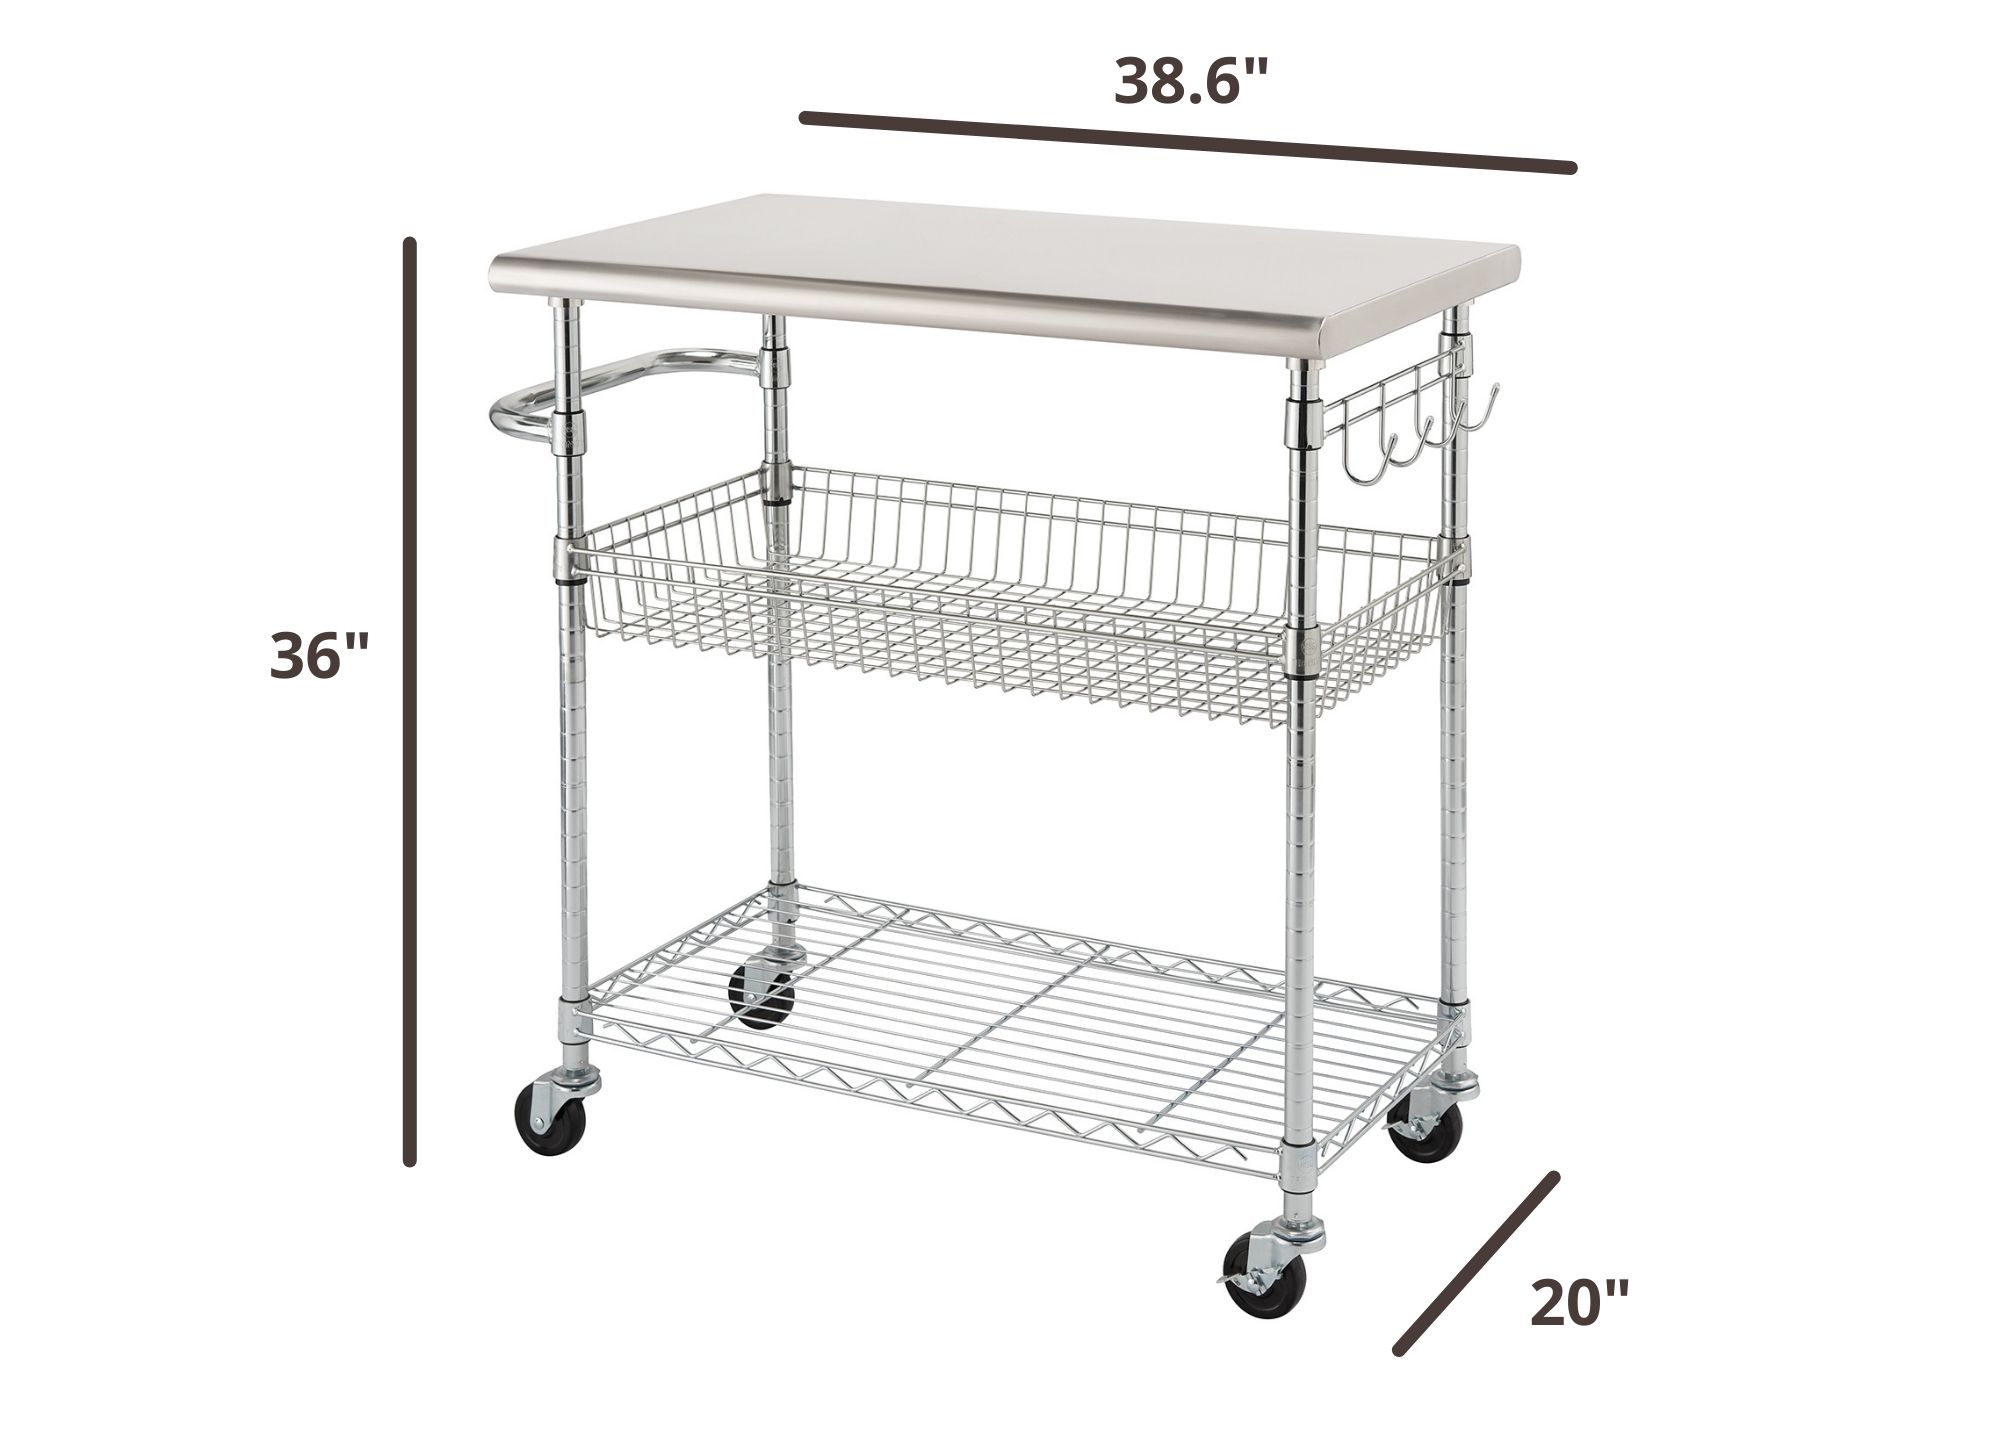 36 inches tall by 38.6 inches wide by 20 inches deep kitchen cart